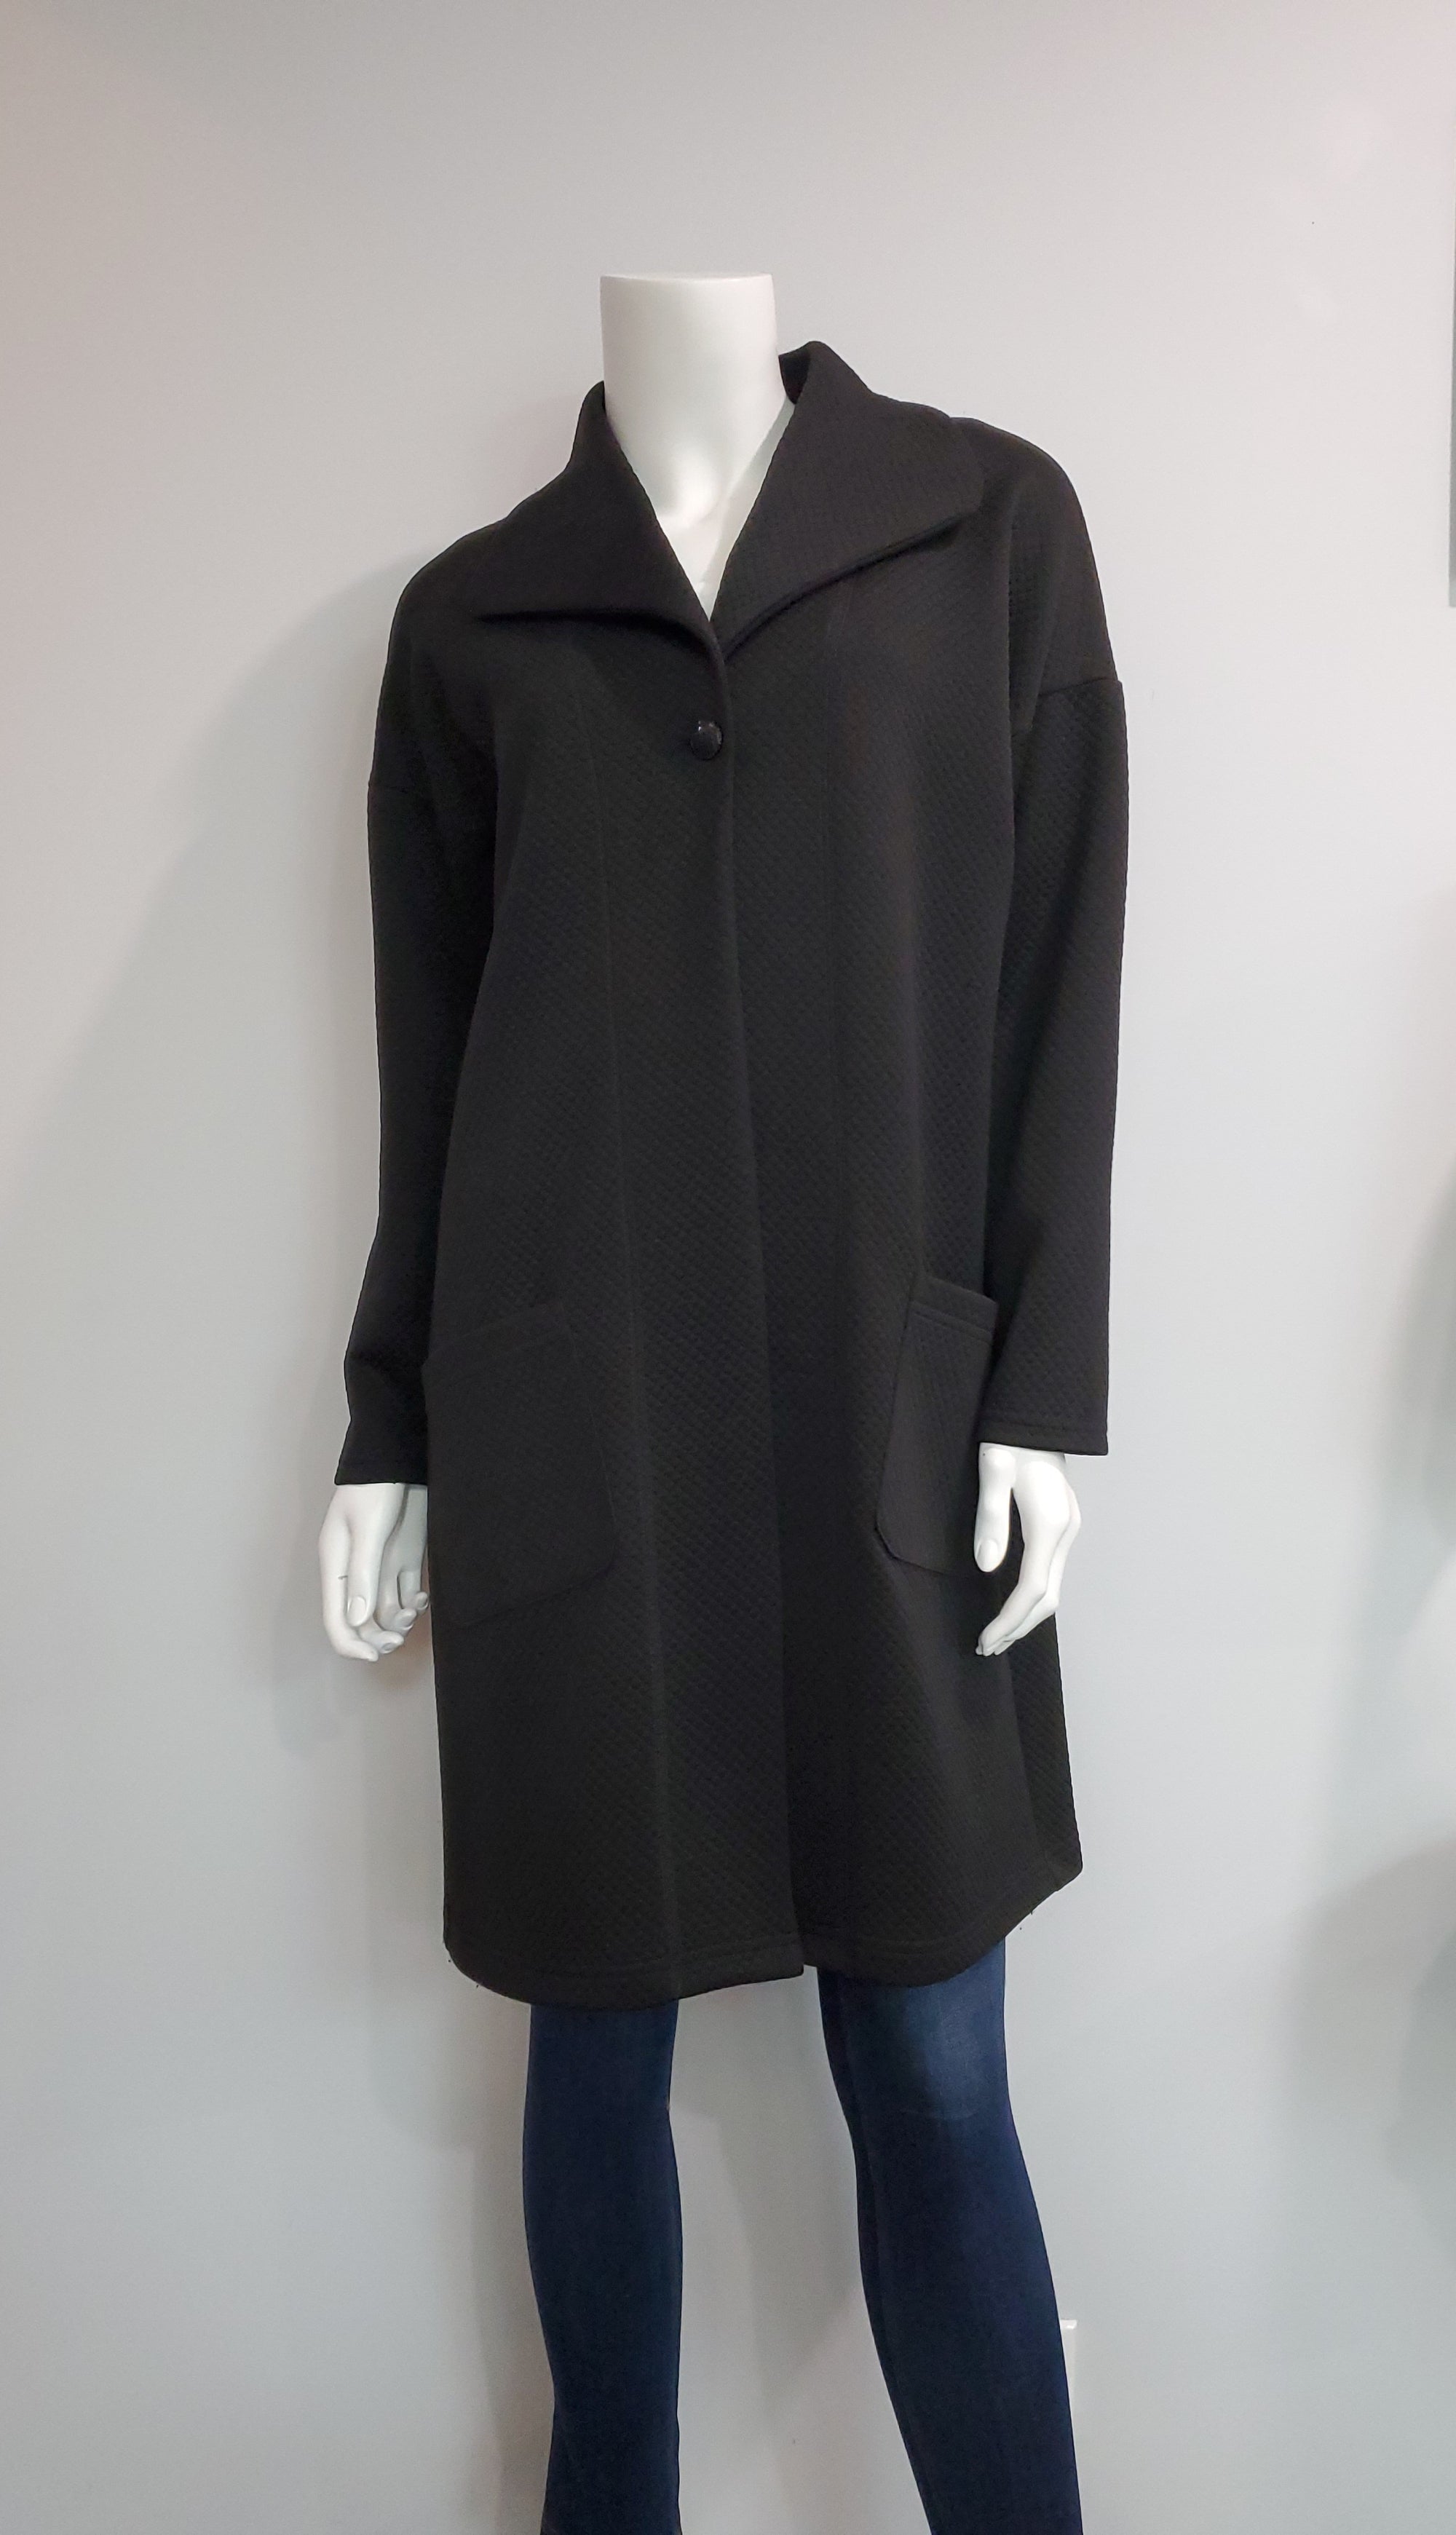 Black Jacquard Knit Shawl Collar Coat with Patch Pockets on the front and single button closure.